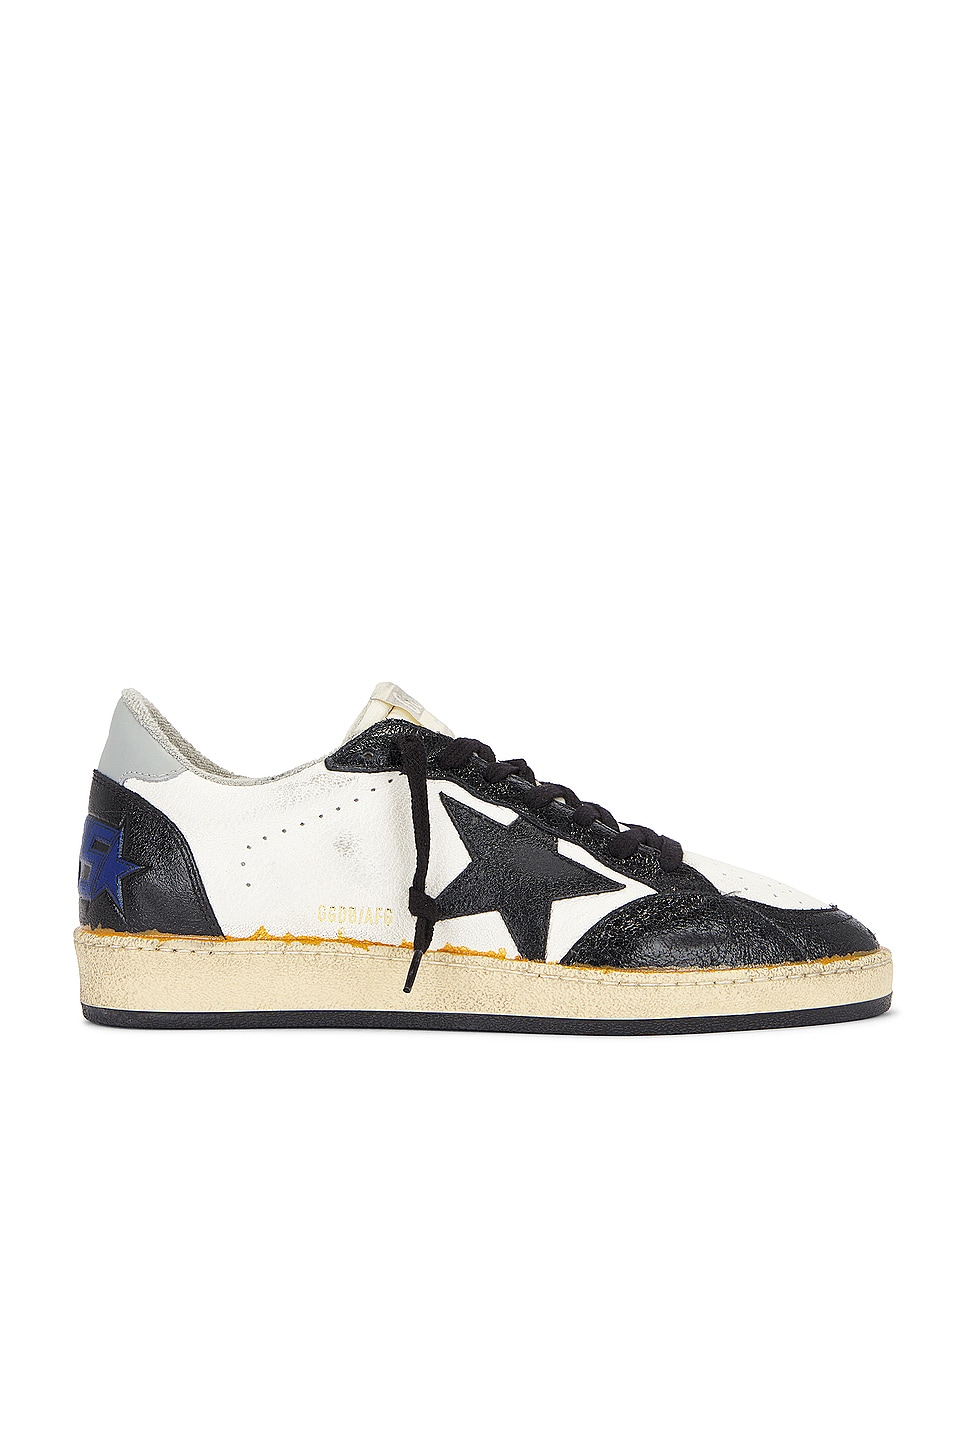 Image 1 of Golden Goose Ball Star Nappa Leather Toe in White, Black, & Grey